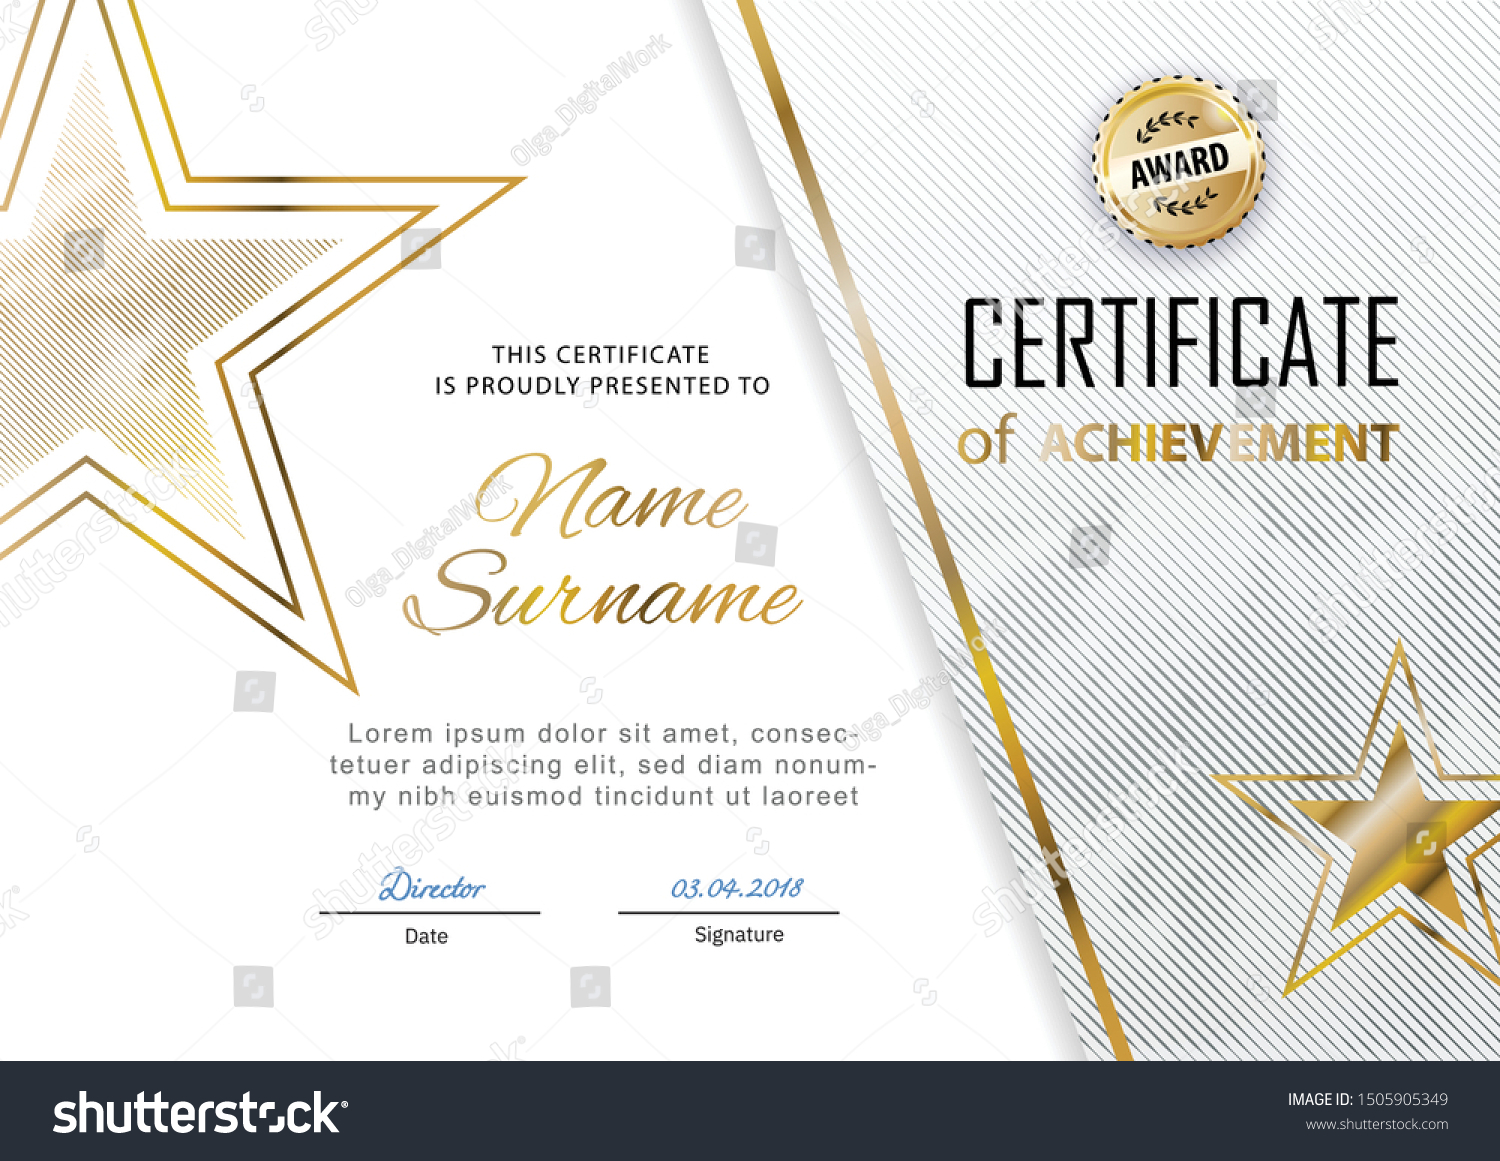 10,10 Certificate Star Template Images, Stock Photos & Vectors  For Star Naming Certificate Template